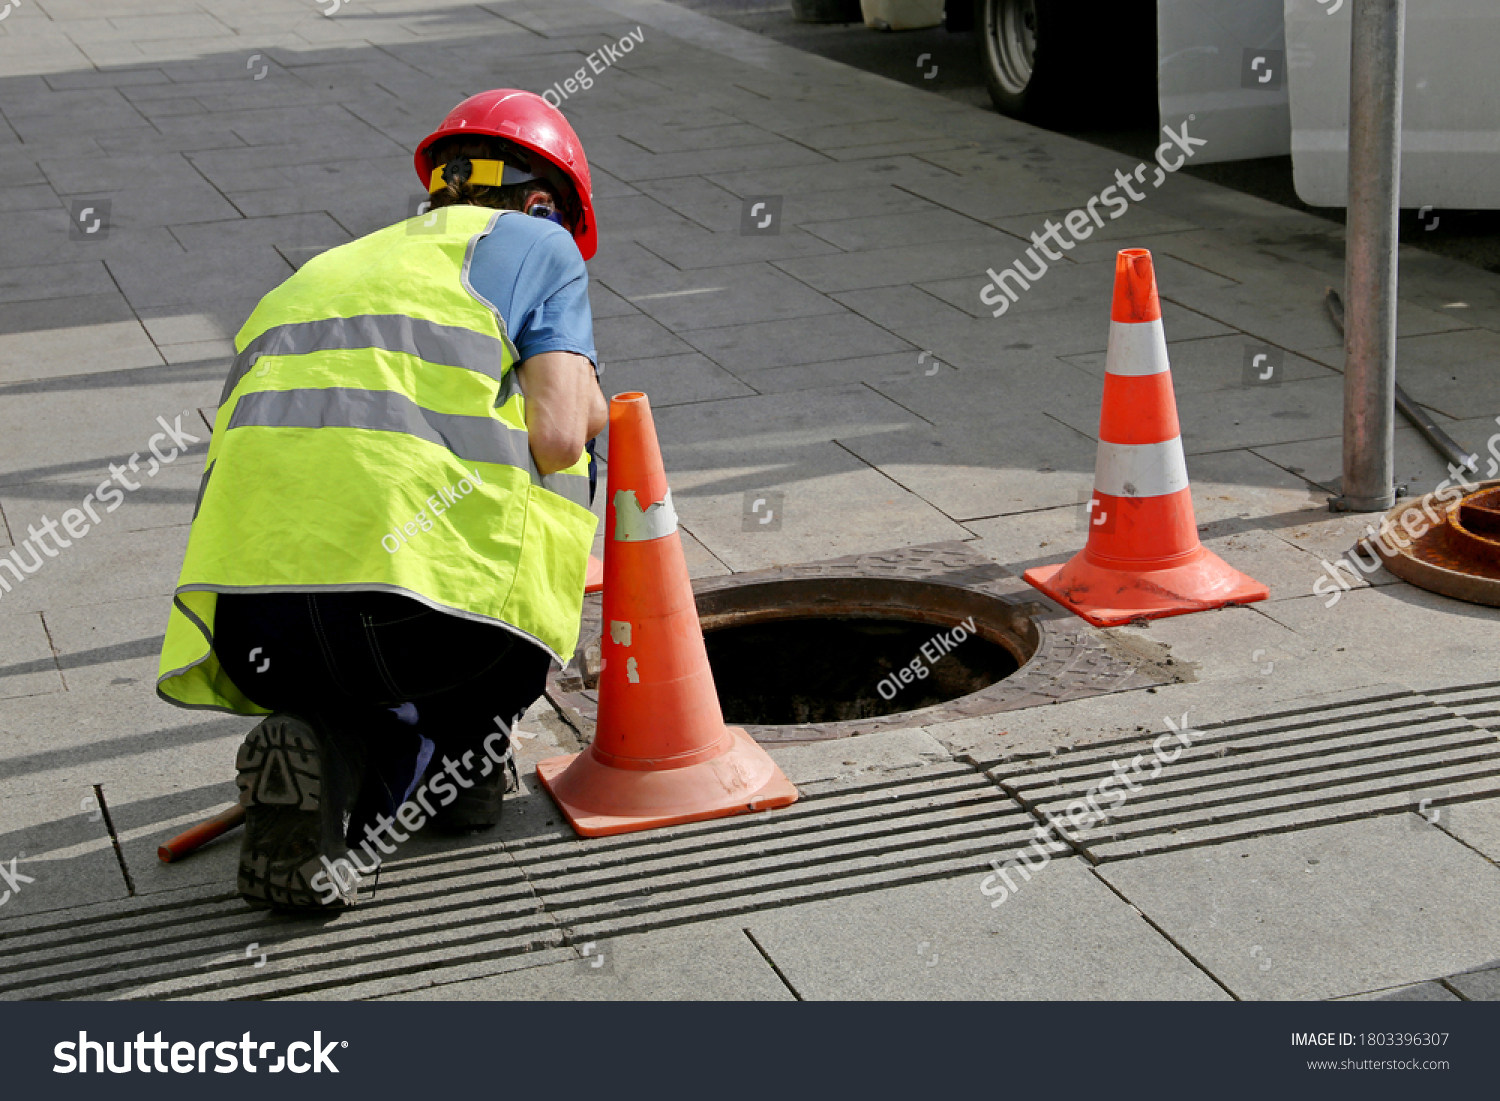 Worker over the open sewer hatch on a street near the traffic cones. Concept of repair of sewage, underground utilities, water supply system, cable laying, water pipe accident #1803396307